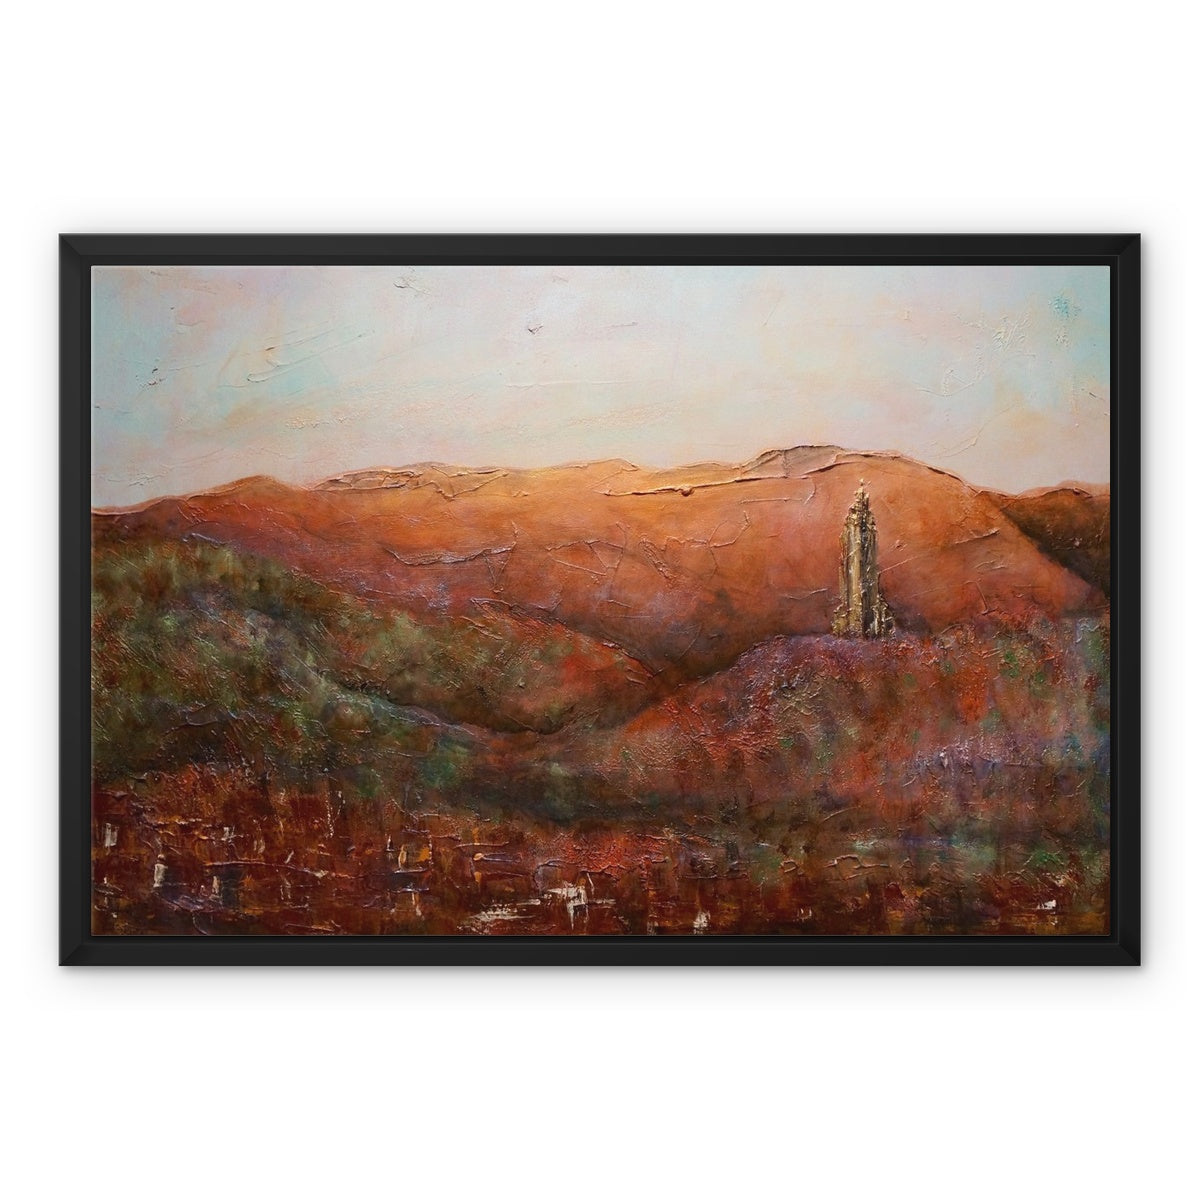 The Wallace Monument Painting | Framed Canvas From Scotland-Floating Framed Canvas Prints-Historic & Iconic Scotland Art Gallery-24"x18"-Black Frame-Paintings, Prints, Homeware, Art Gifts From Scotland By Scottish Artist Kevin Hunter